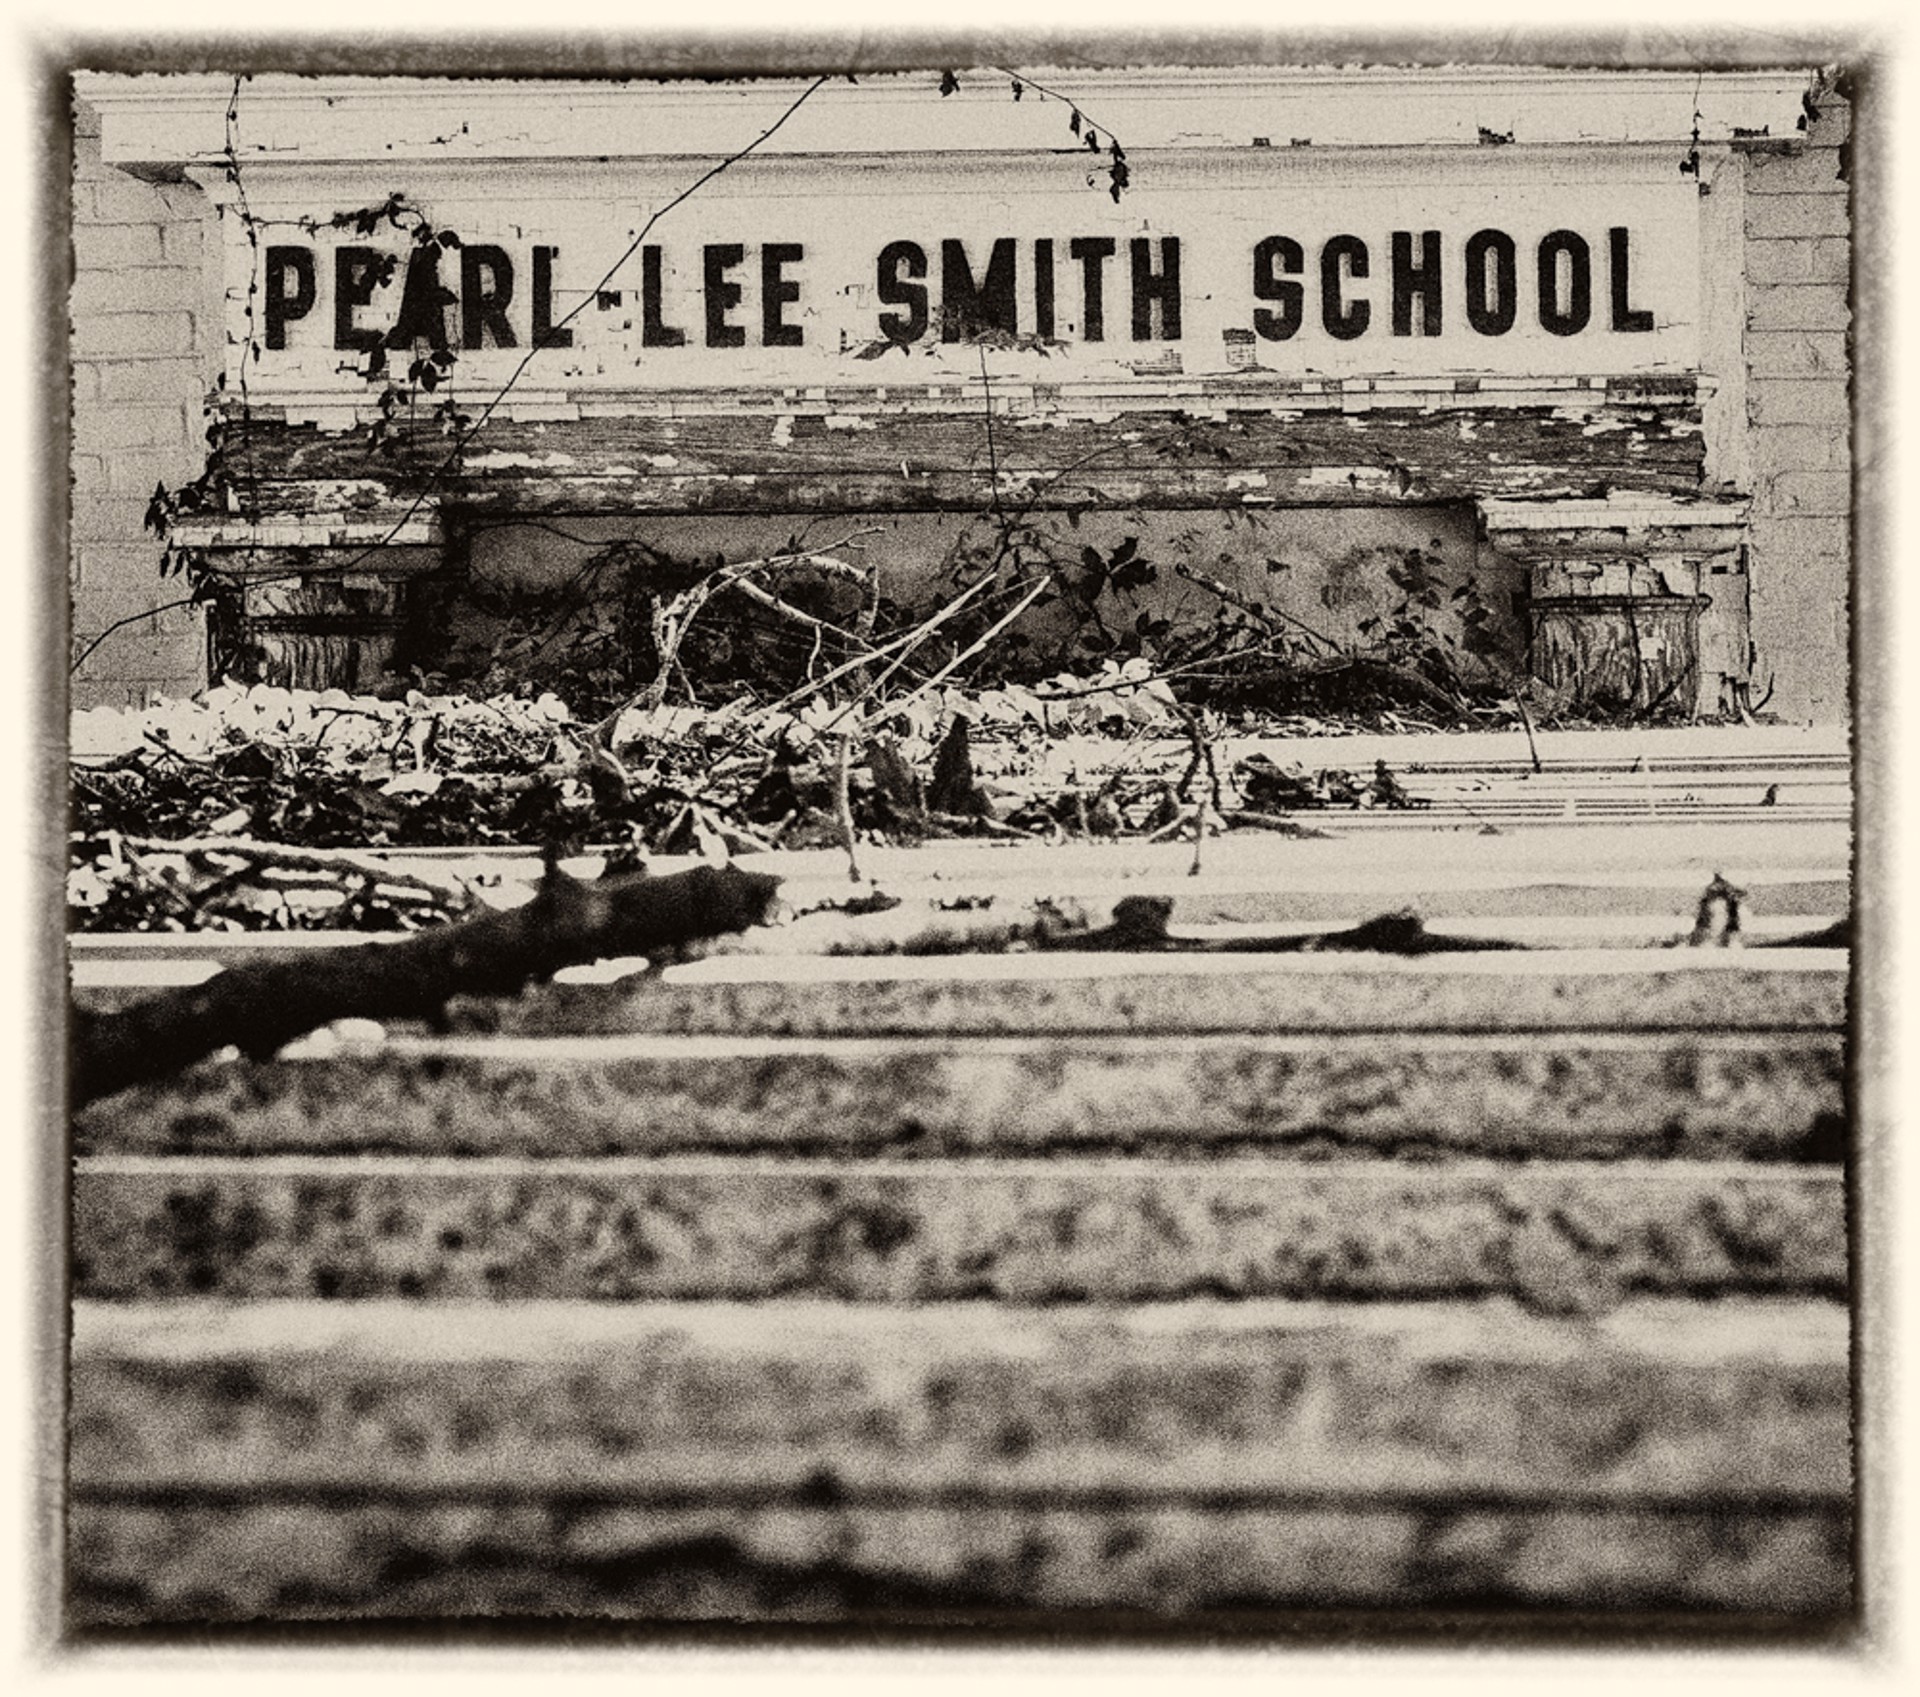 pearl lee smith elementary school by James Graham